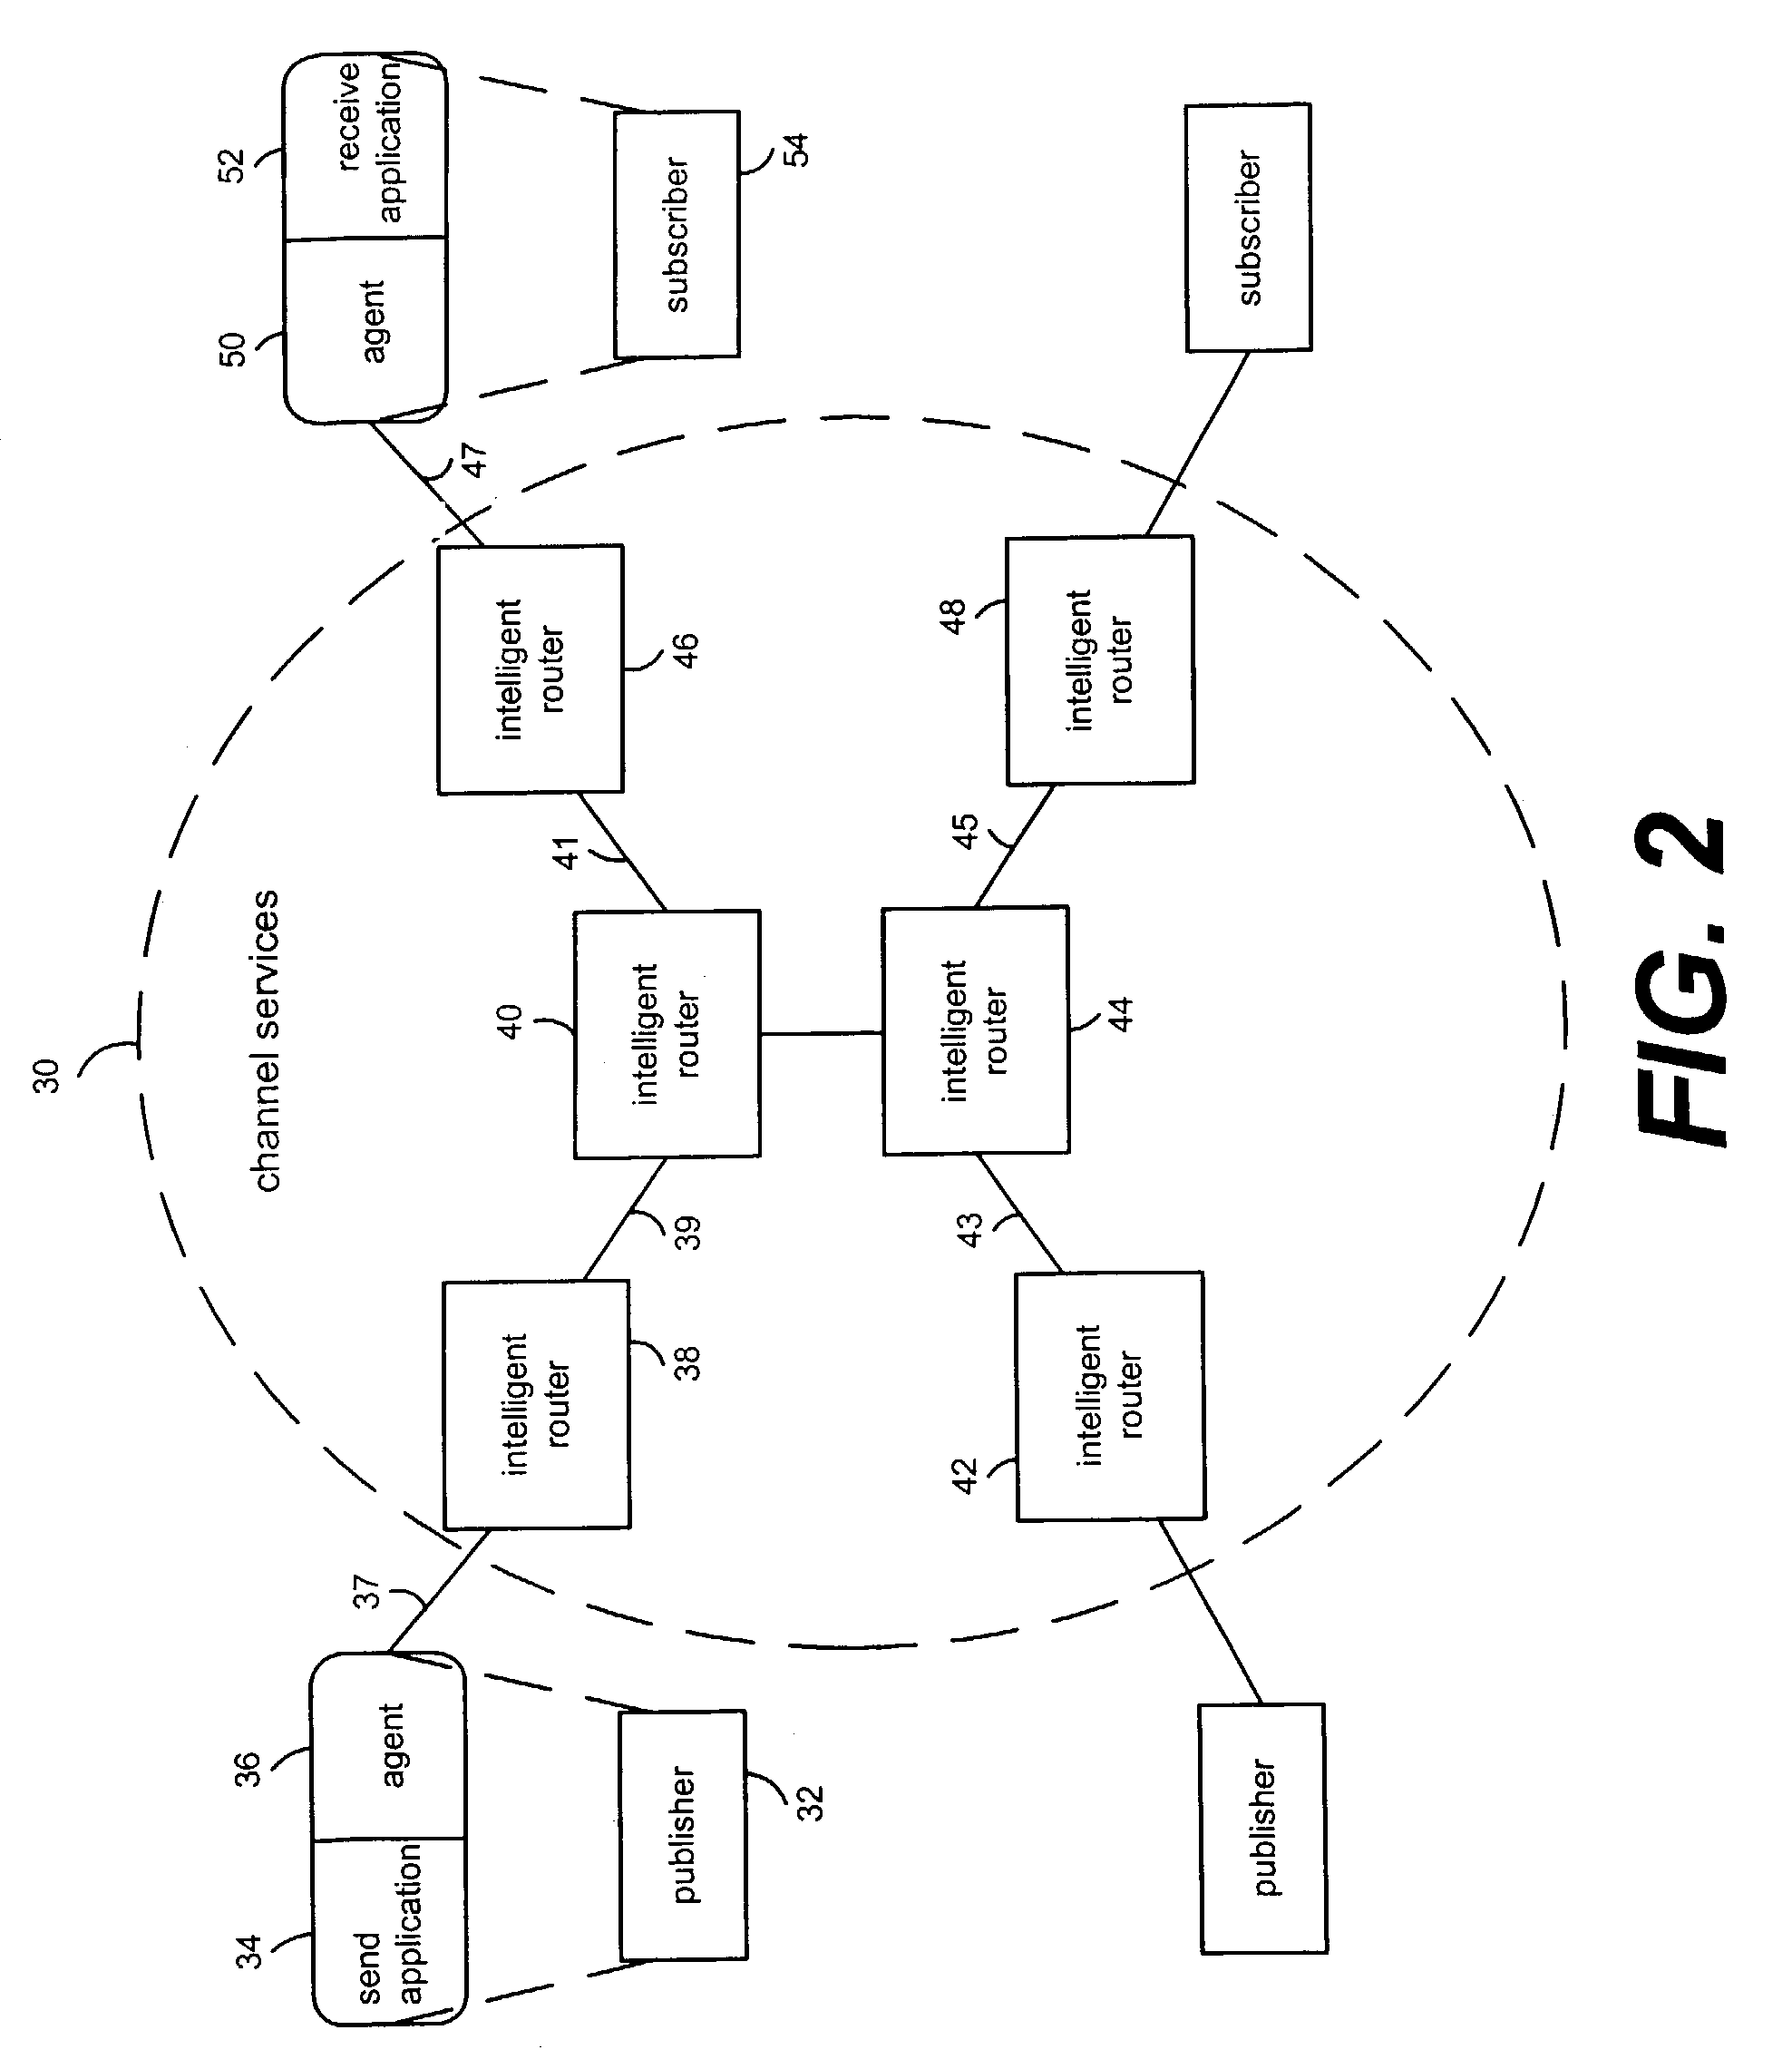 Method and apparatus for implementing persistent and reliable message delivery